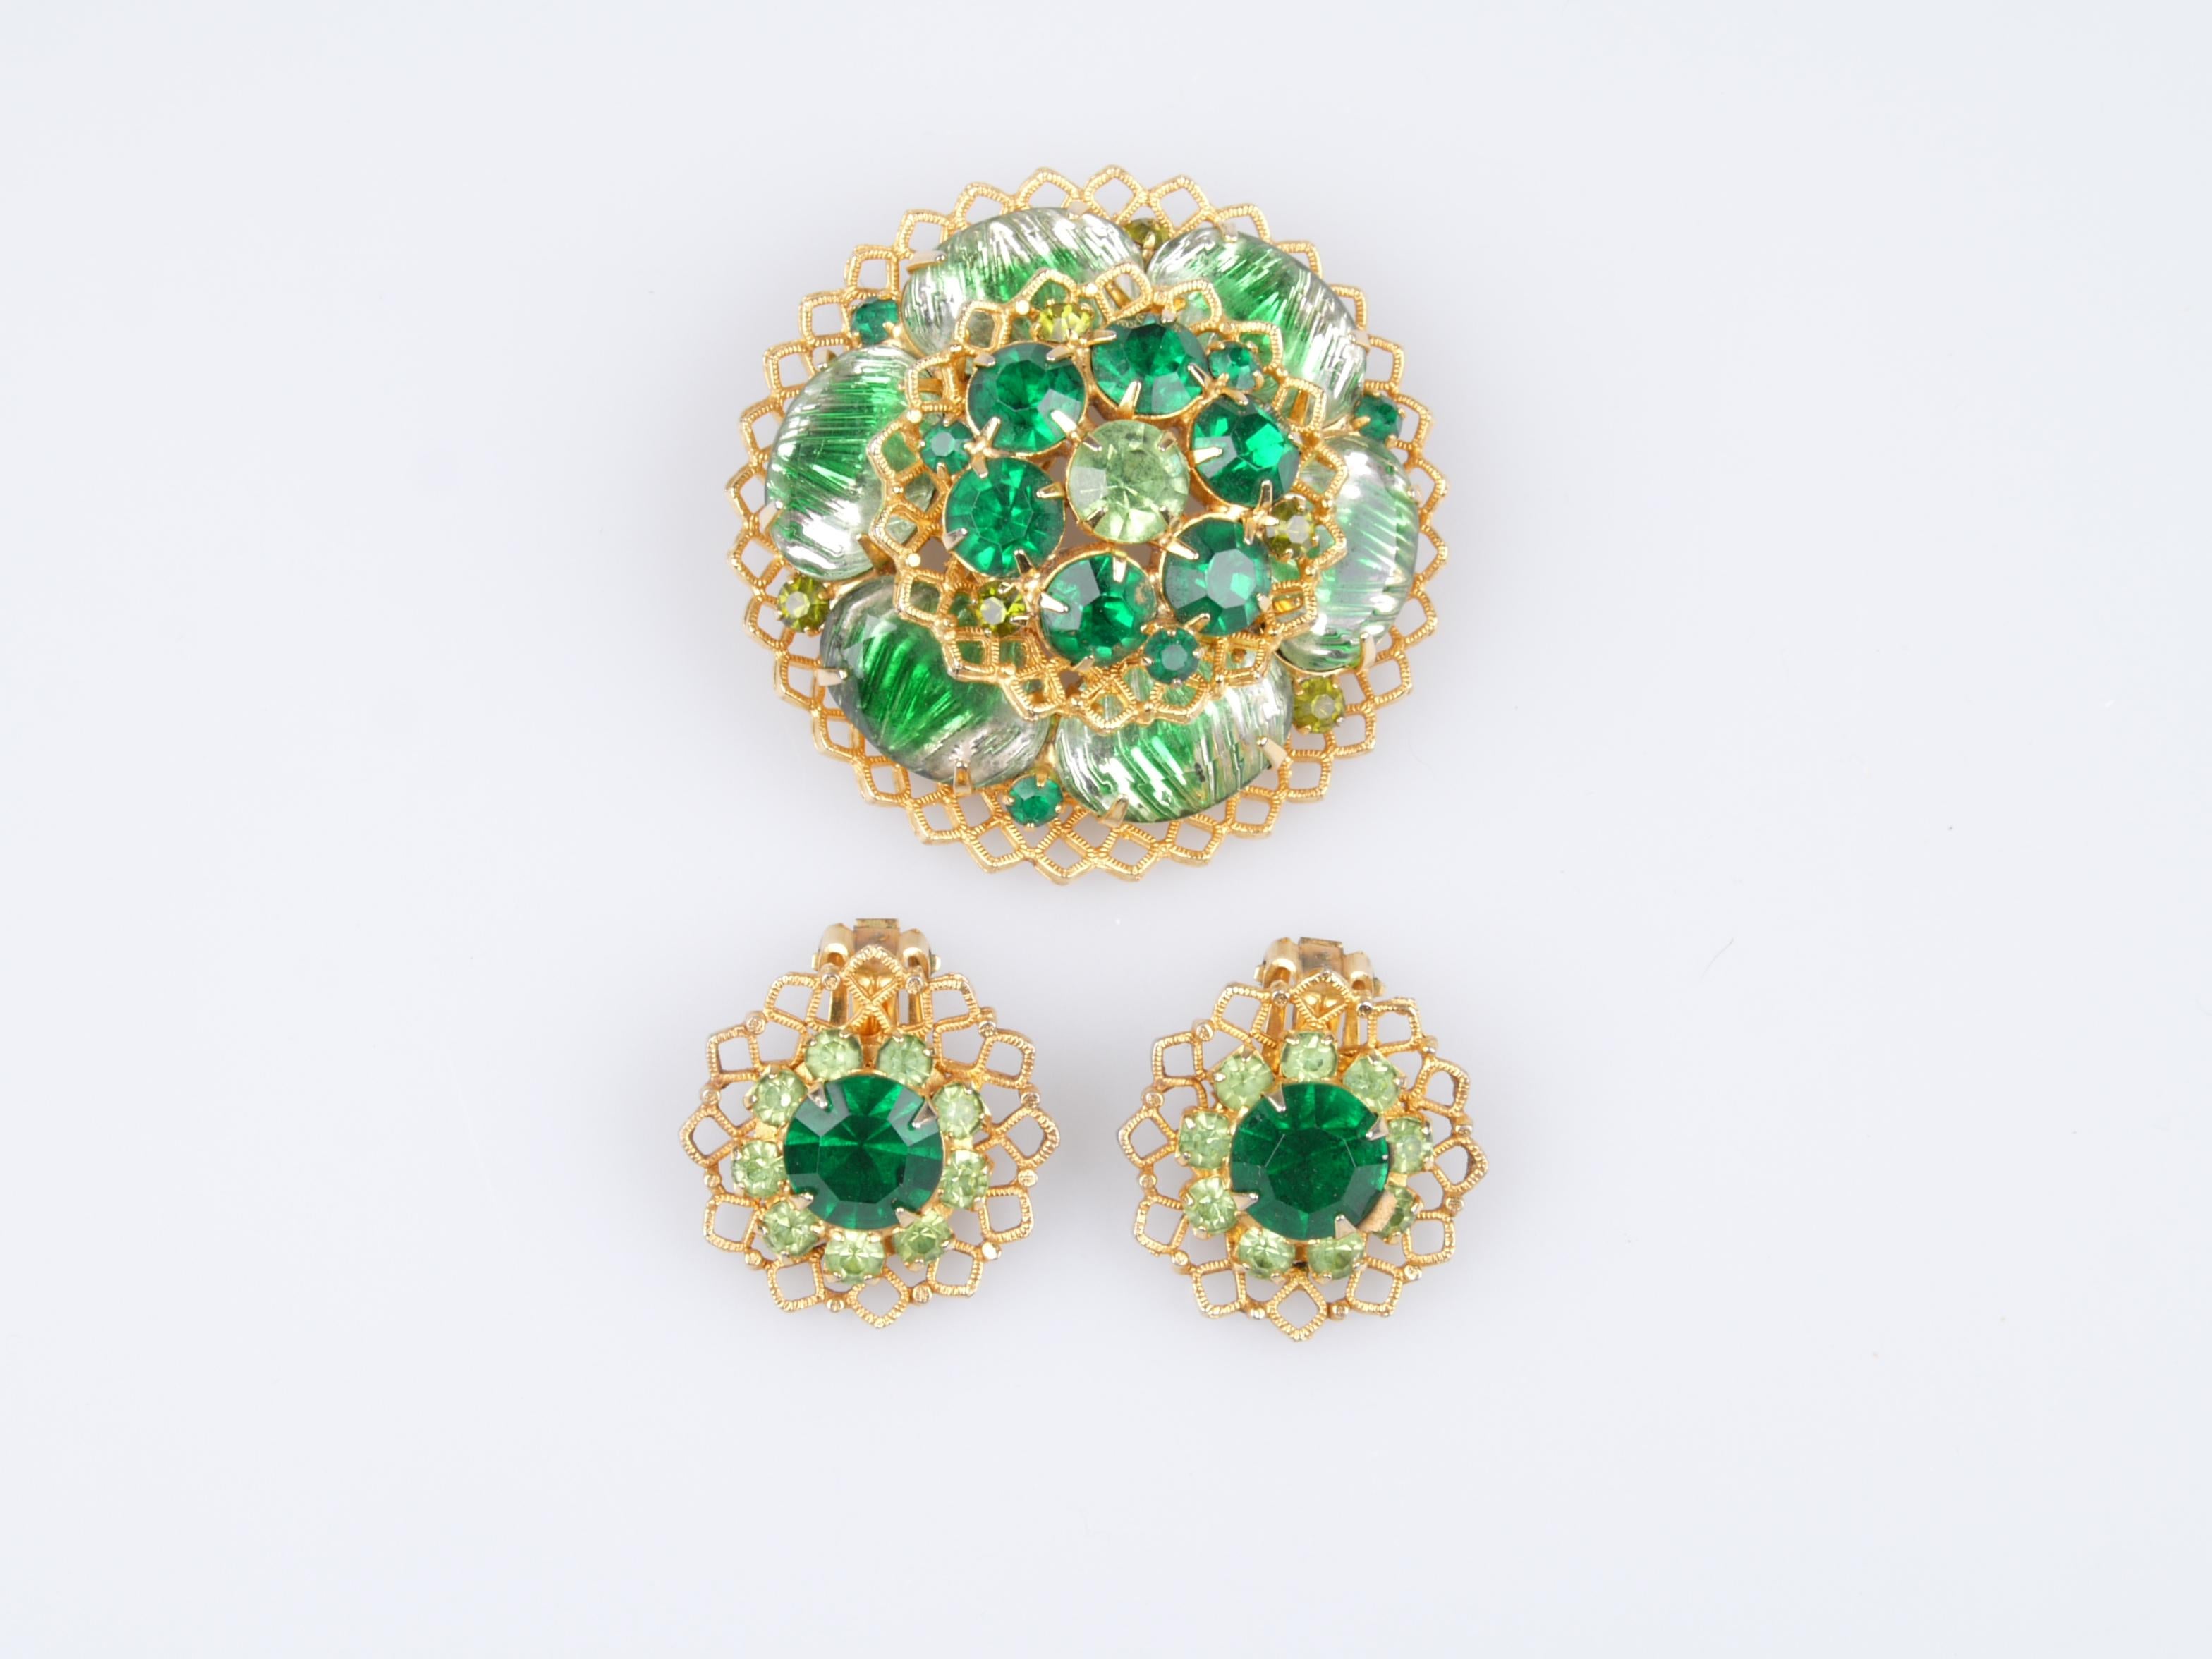 Brooch and earrings set in emerald green, 3 pieces.
Brooch and clip back earrings set with clear green stones and gold-tone filigree.
Earrings, 1 inch diameter x 0.25 inches height.
Dimensions: 2.0 inches W × 0.75 inches D.

   